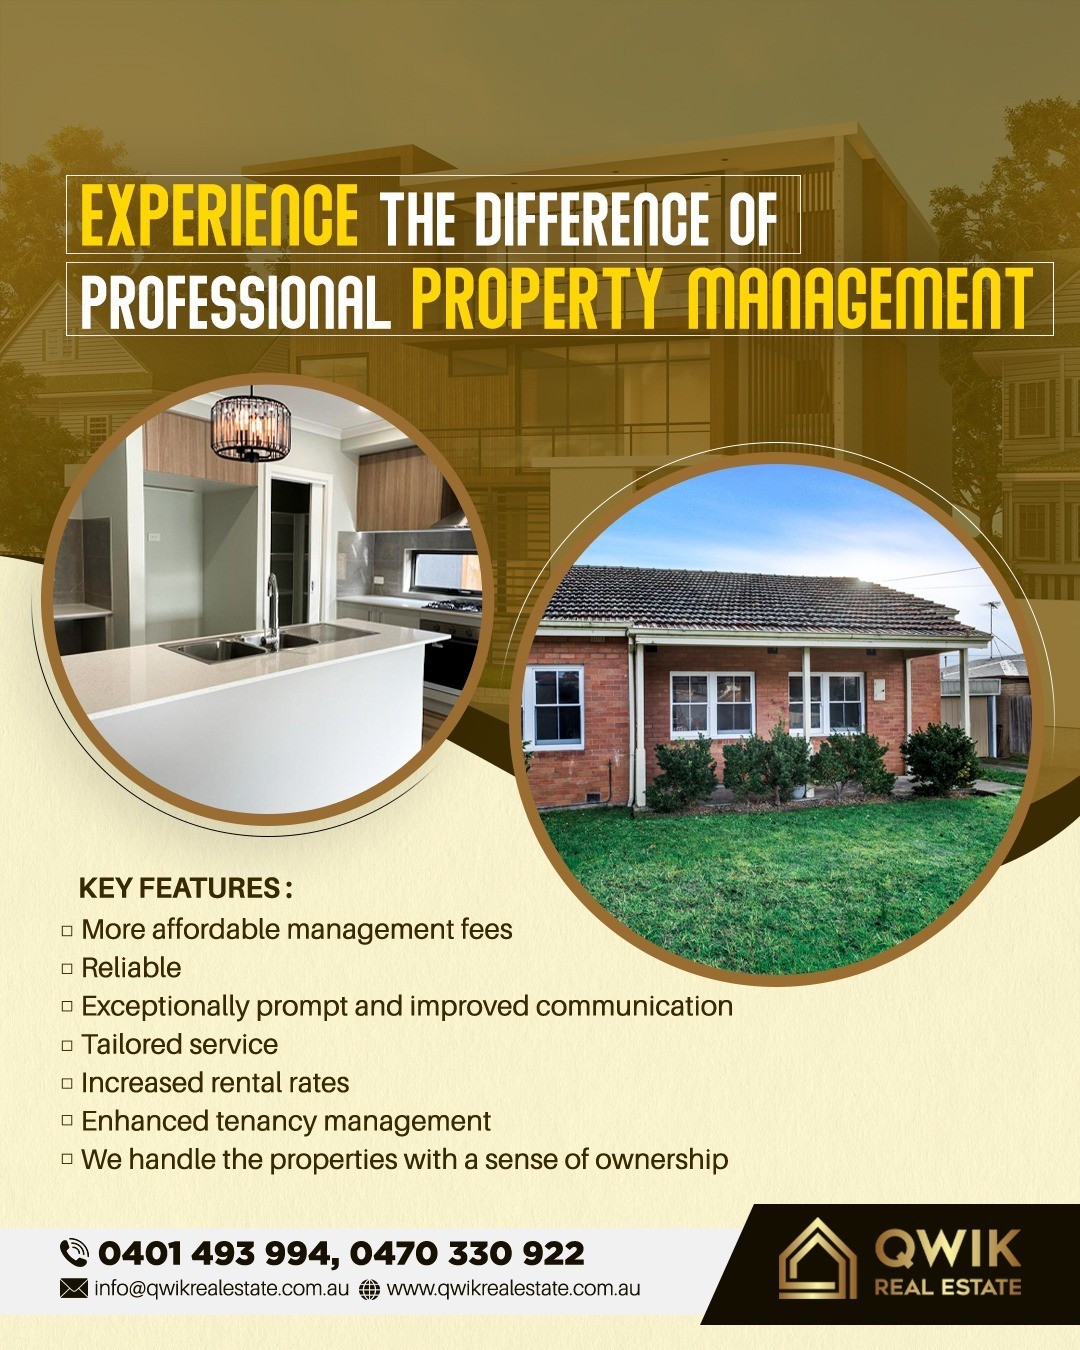 Property management agency in Geelong